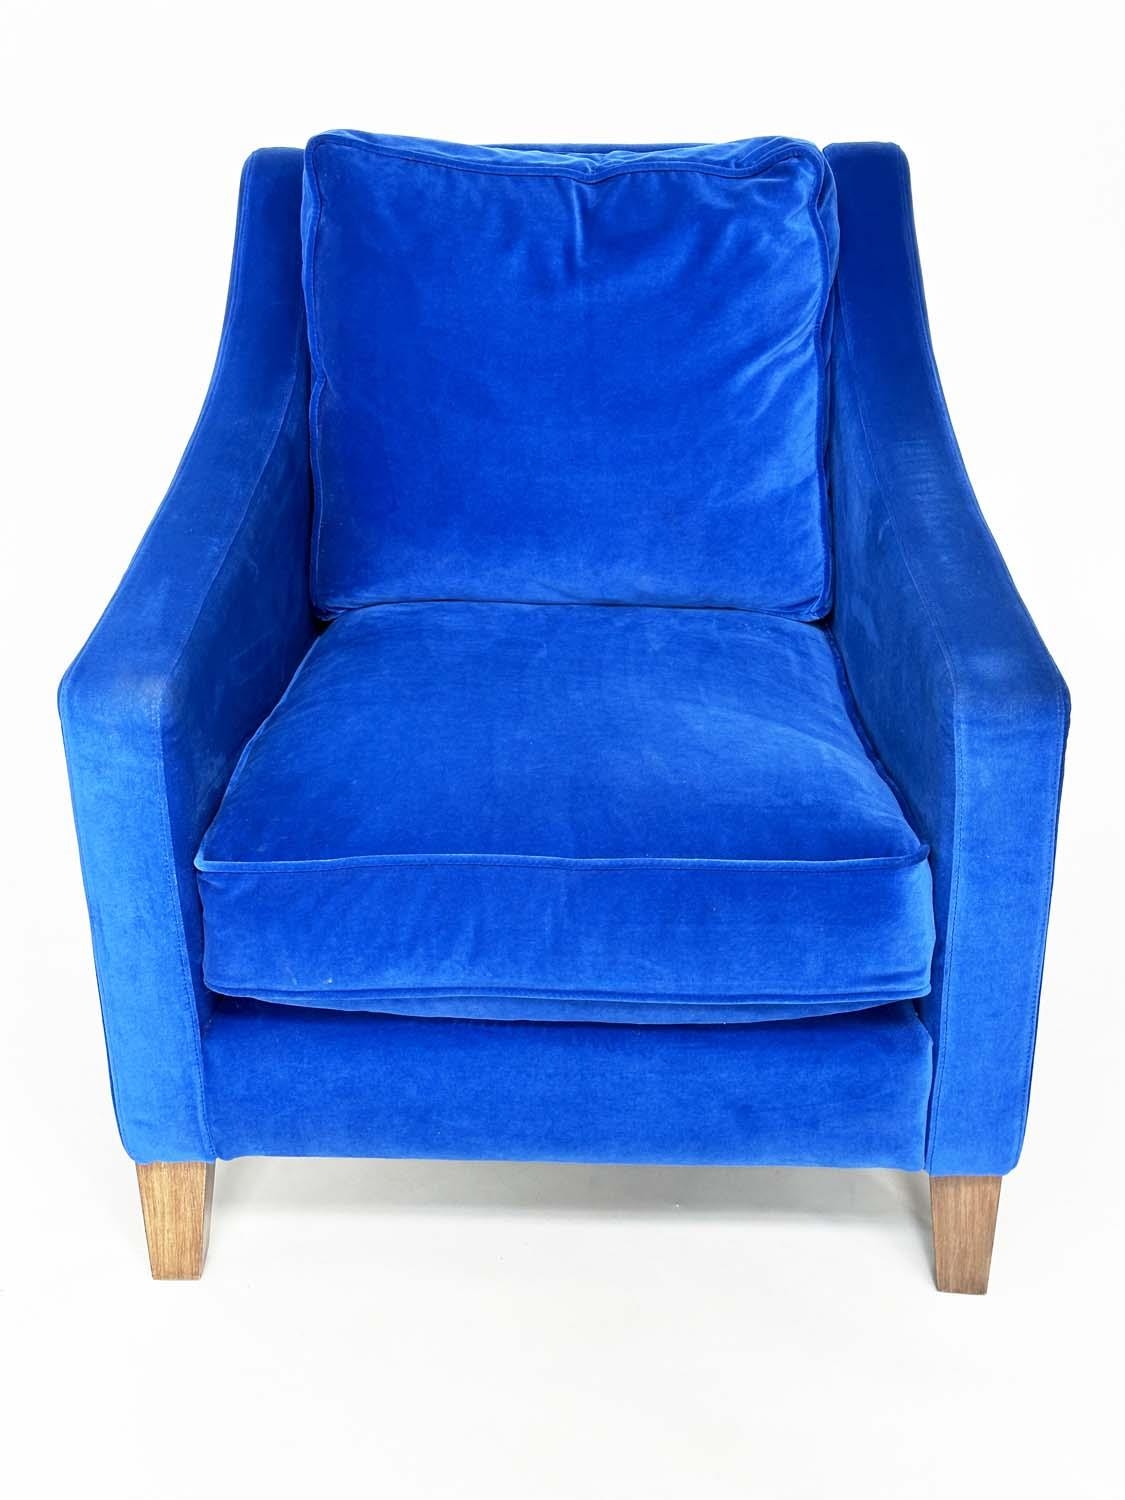 ARMCHAIR, traditional, blue velvet upholstered with soft cushions and tapering supports, Sofa.com, - Image 9 of 11